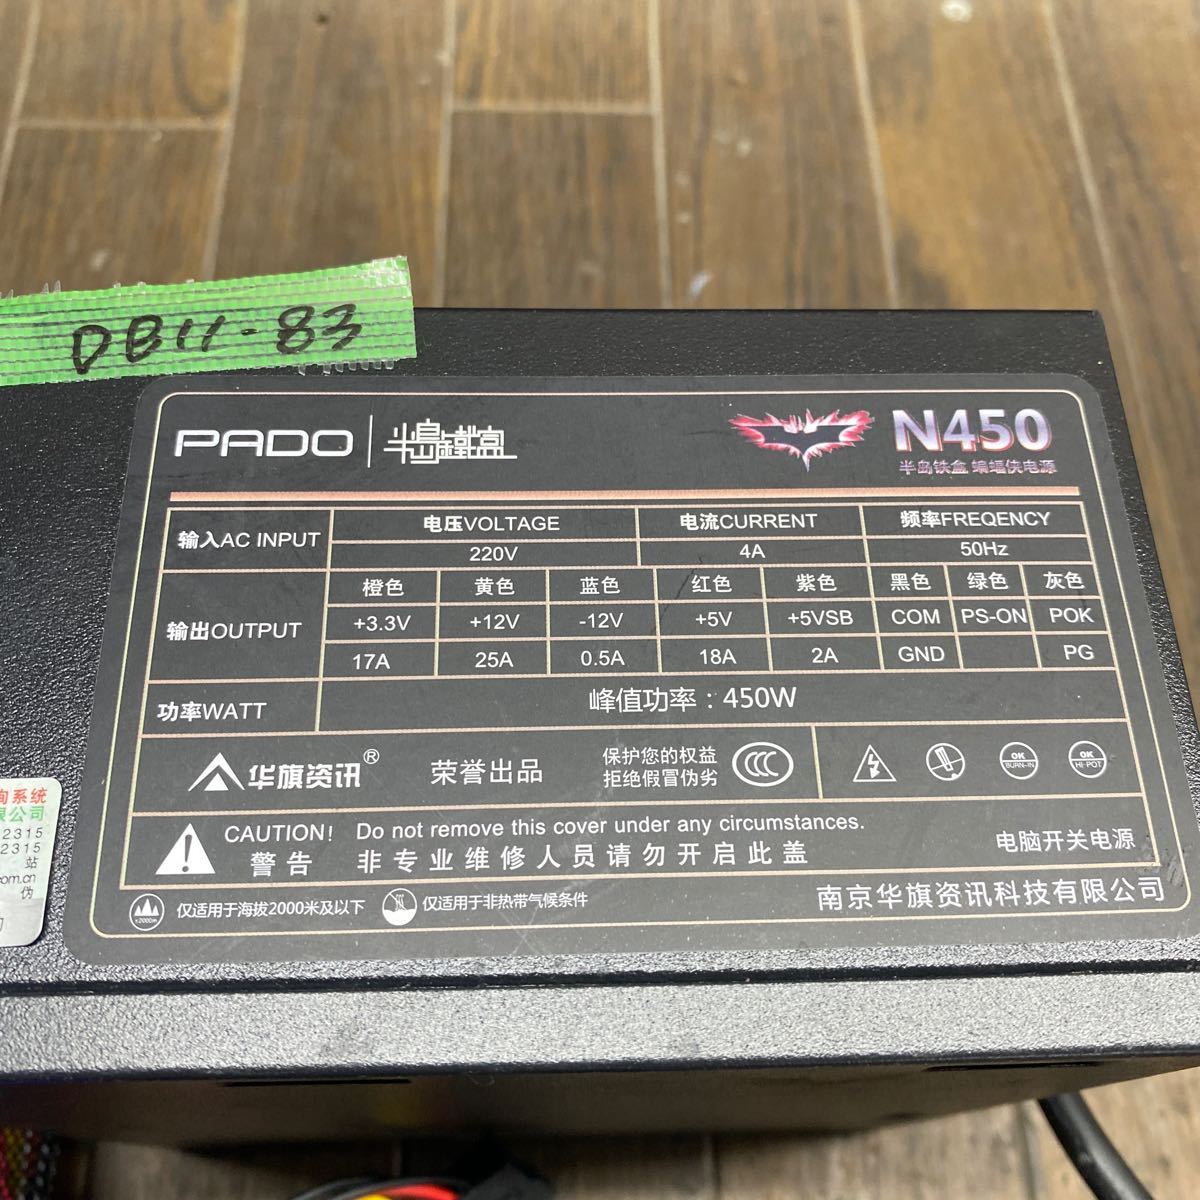 DB11-83 super-discount PC power supply BOX PADO N450 450W power supply unit power supply tester .. voltage has confirmed secondhand goods 